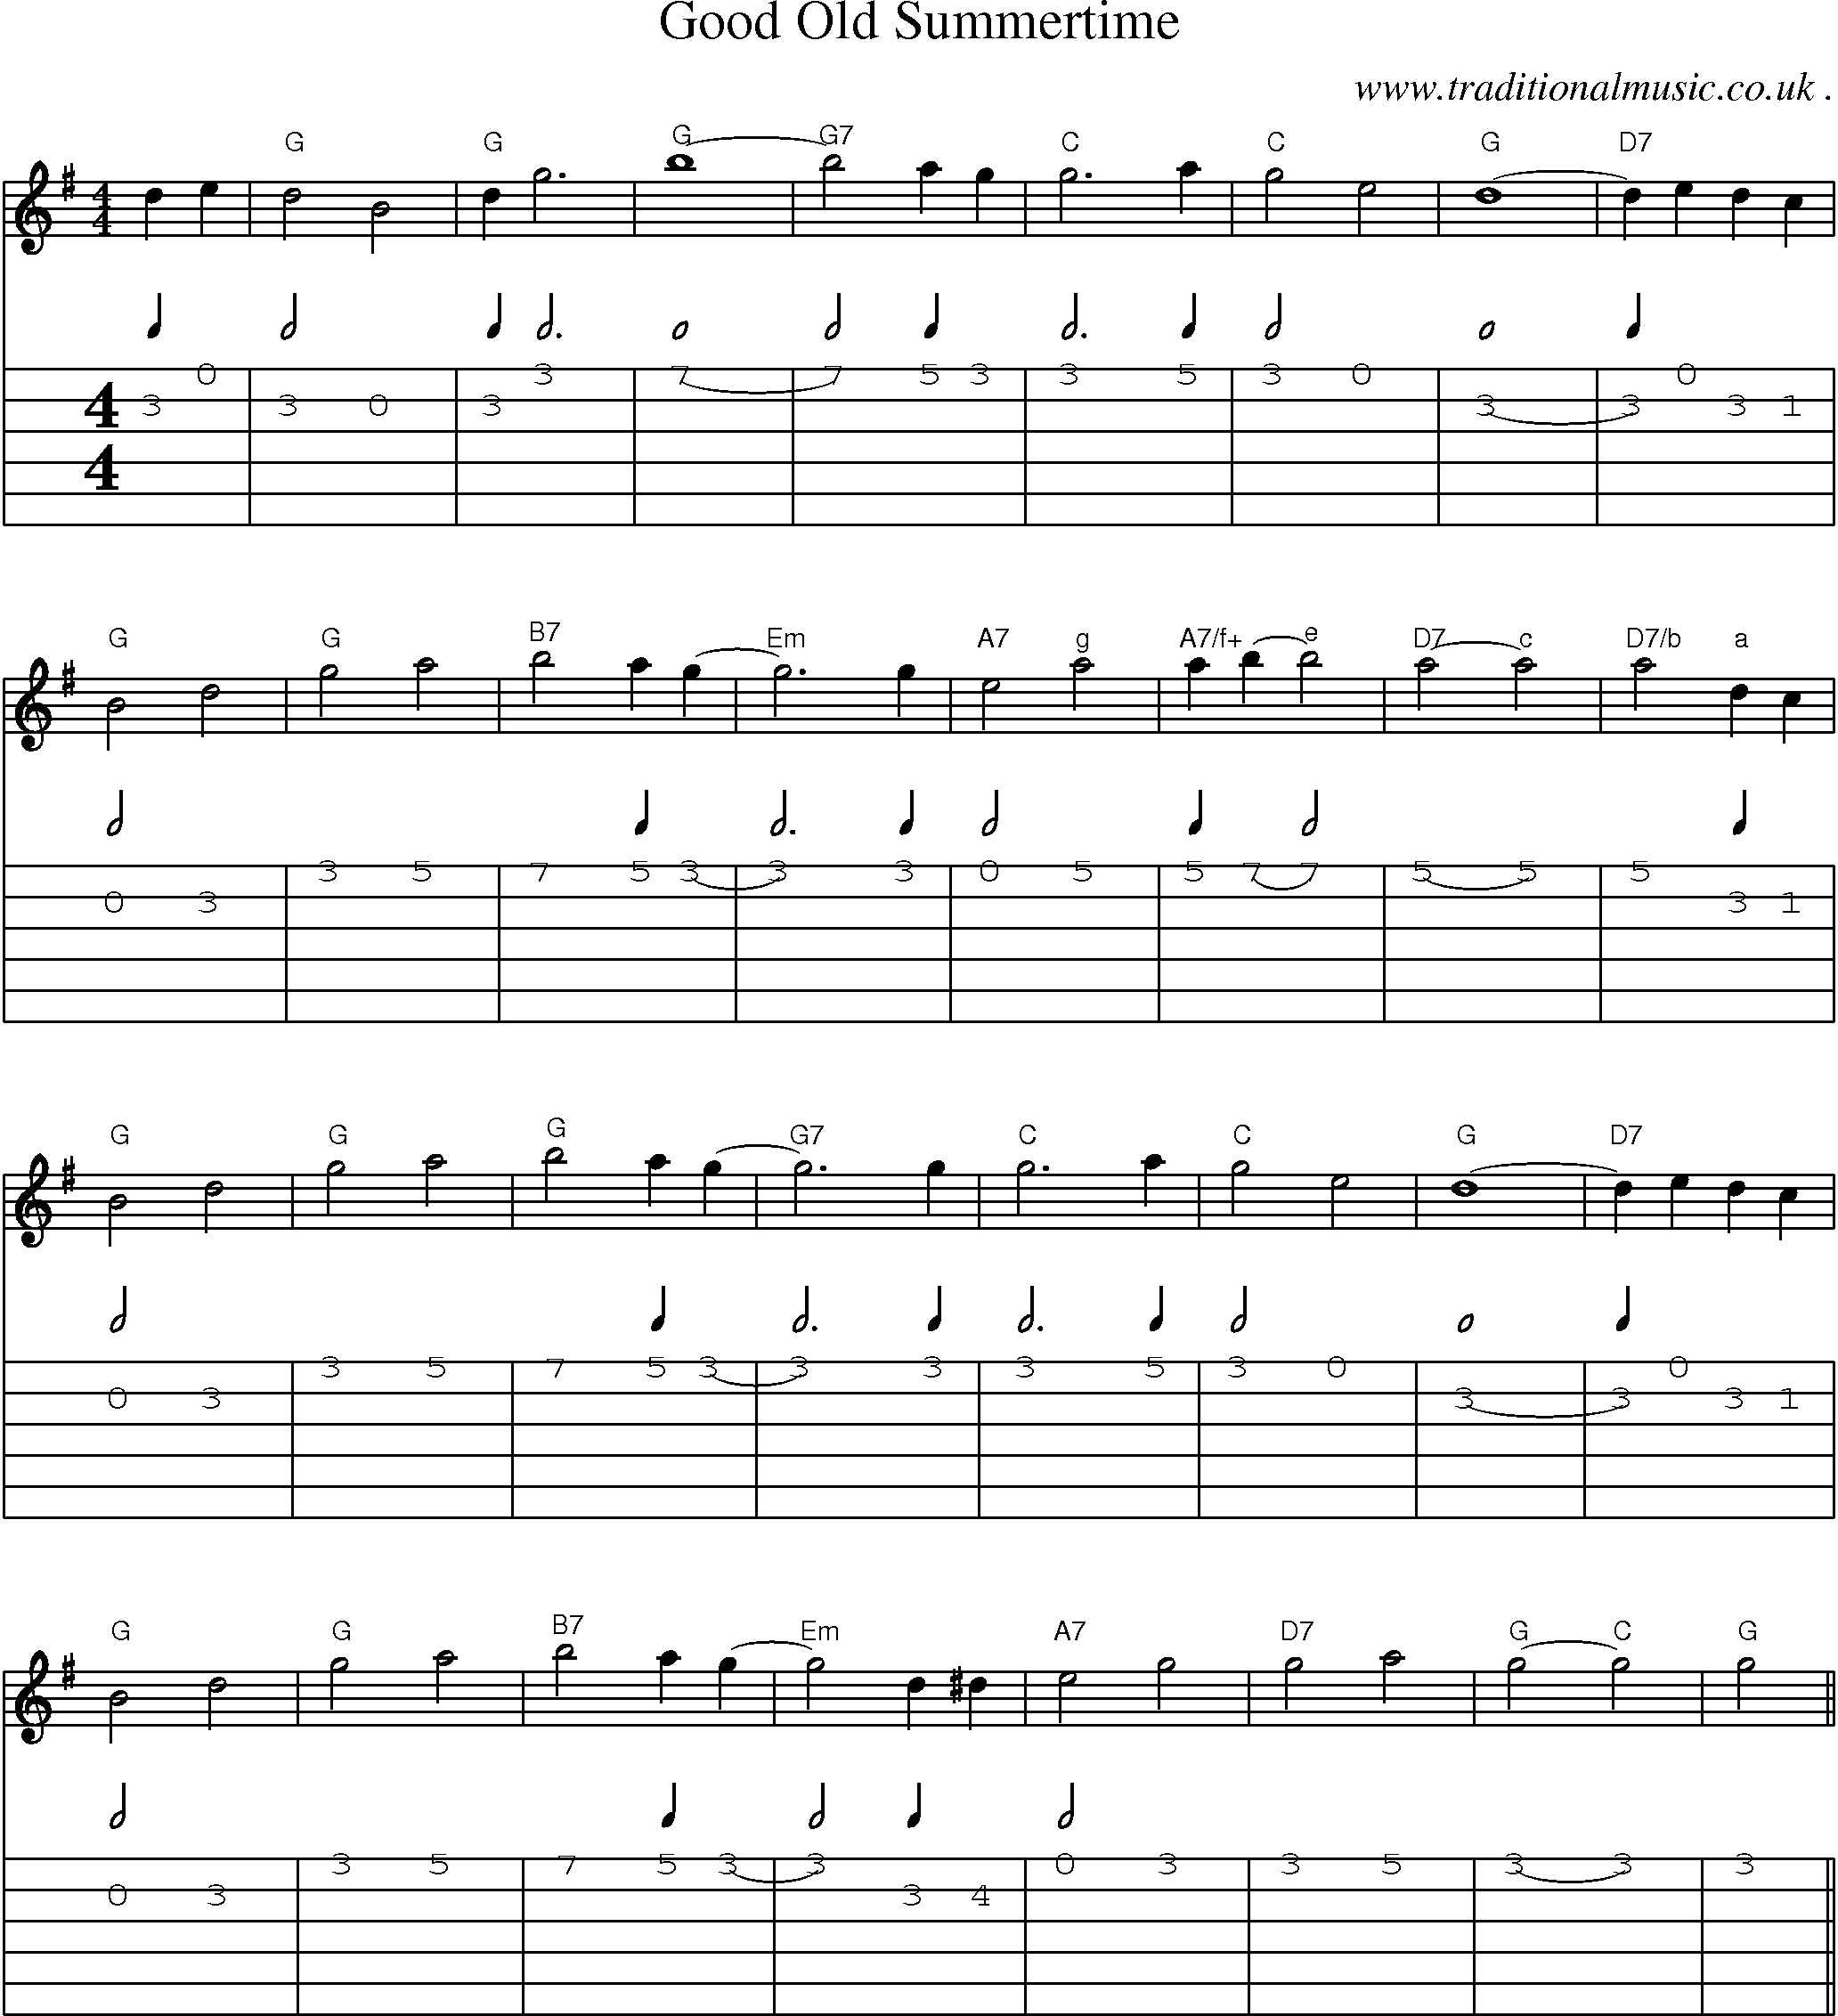 Sheet-Music and Guitar Tabs for Good Old Summertime